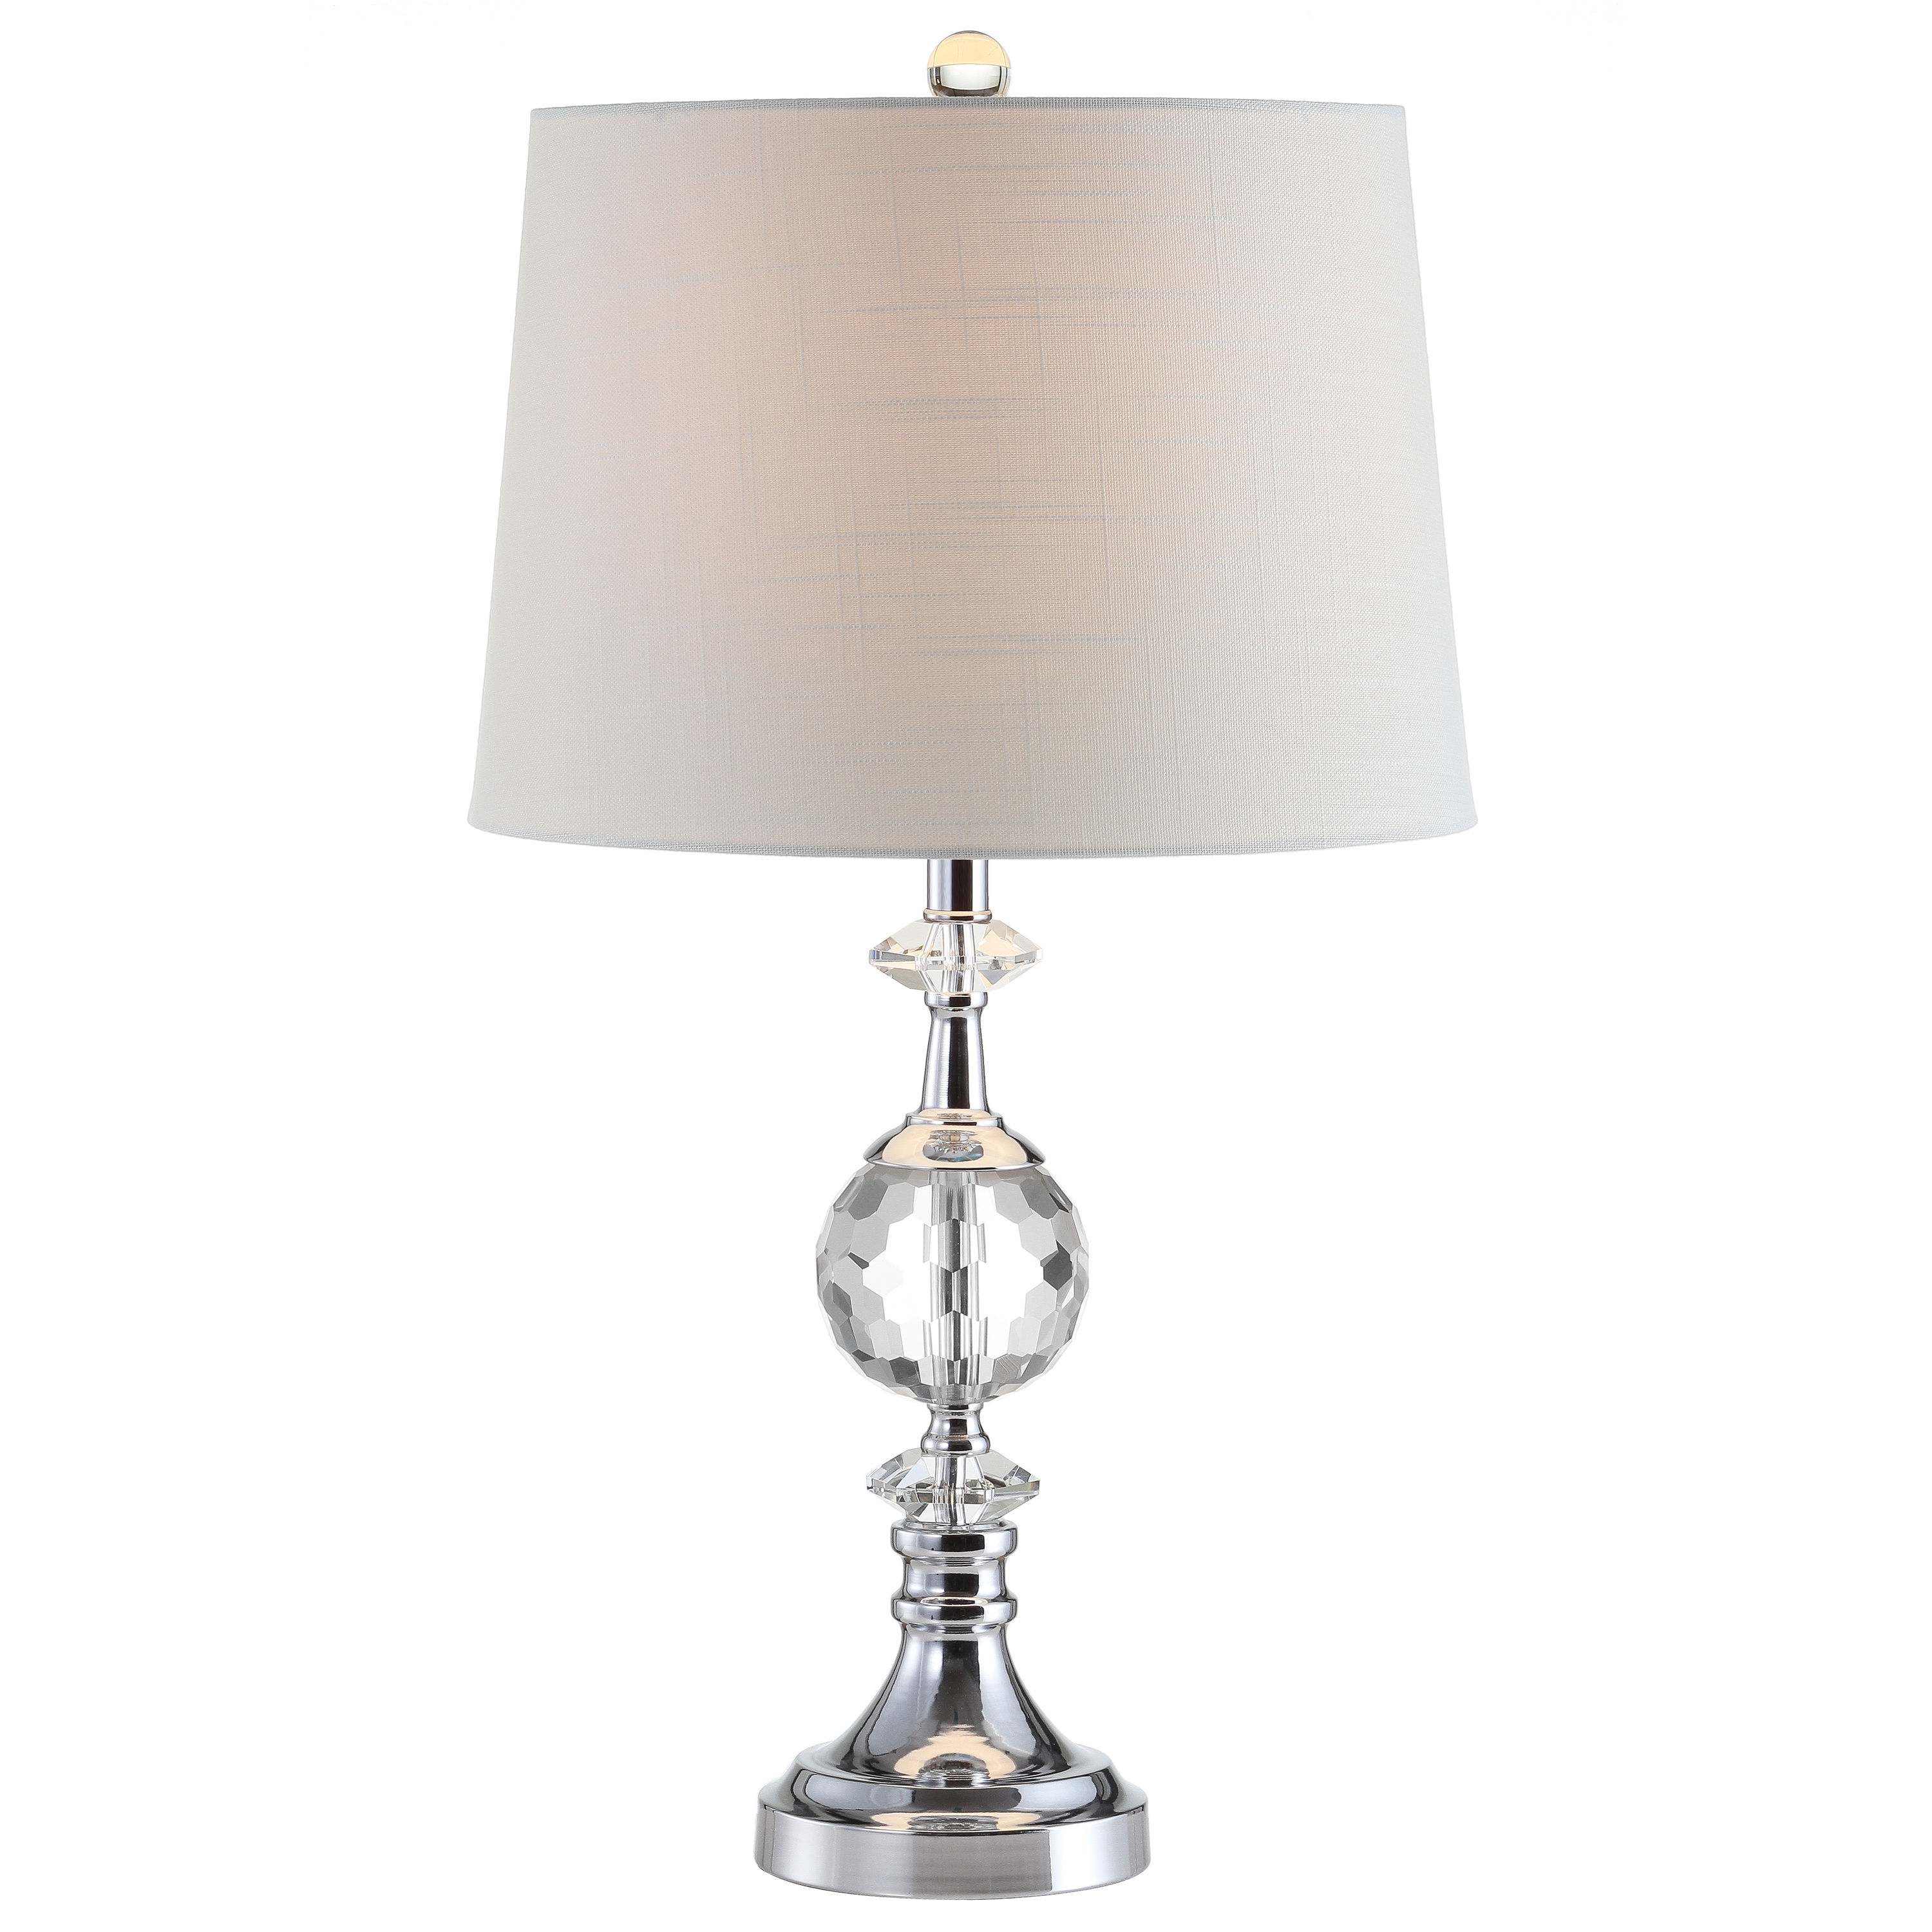 JONATHAN  Y Contemporay 25.5-in Chrome Rotary Socket Table Lamp with Linen Shade